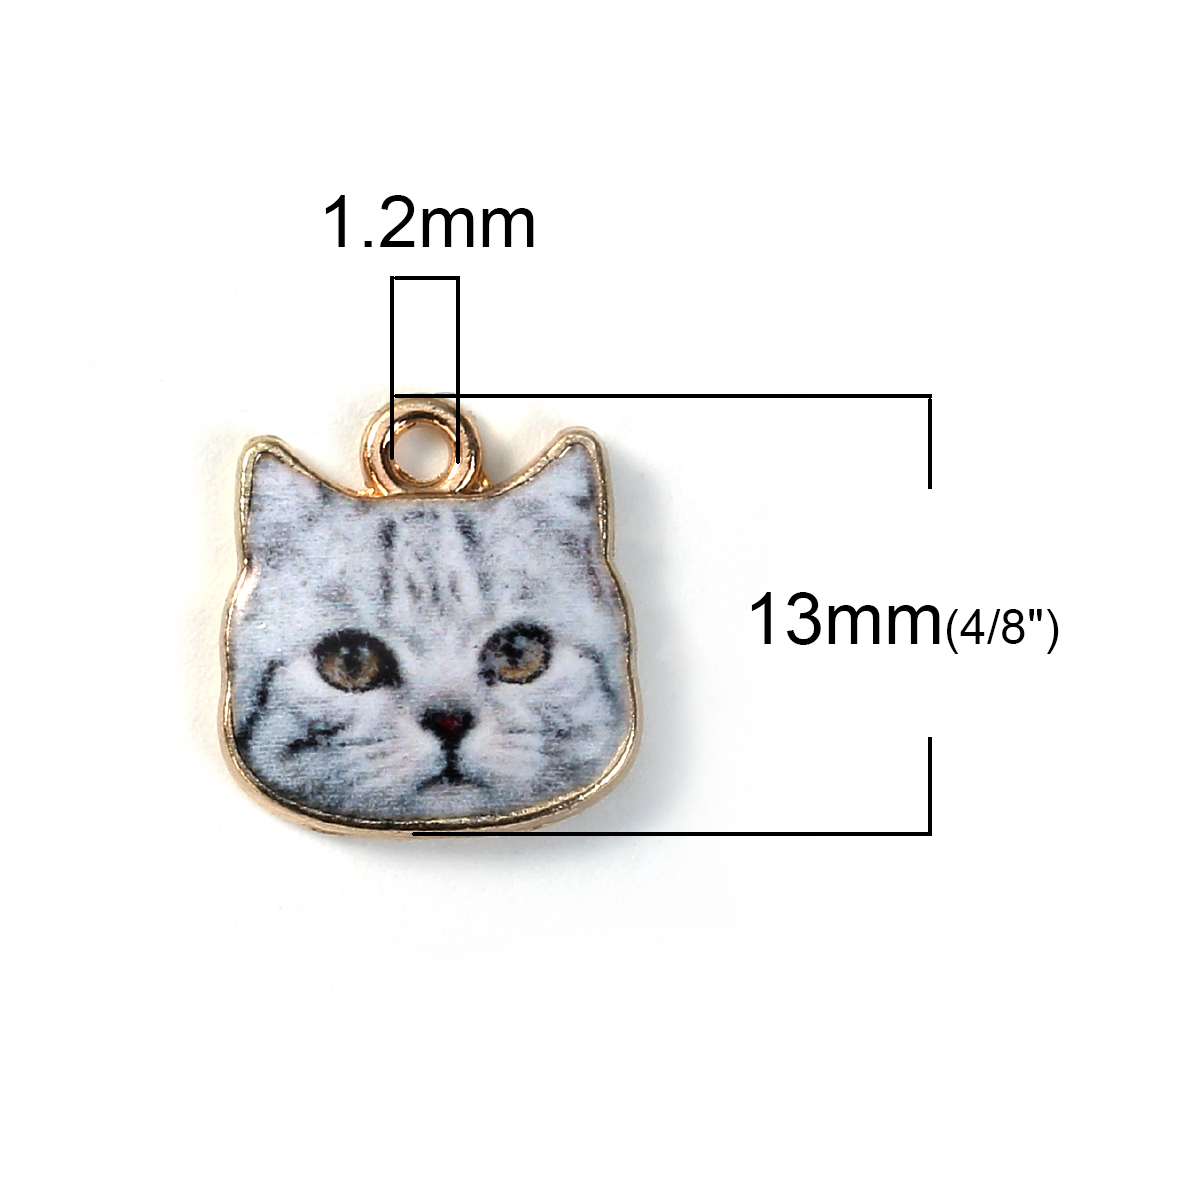 Picture of Zinc Based Alloy Charms Cat Animal Gold Plated Gray 13mm( 4/8") x 13mm( 4/8"), 10 PCs